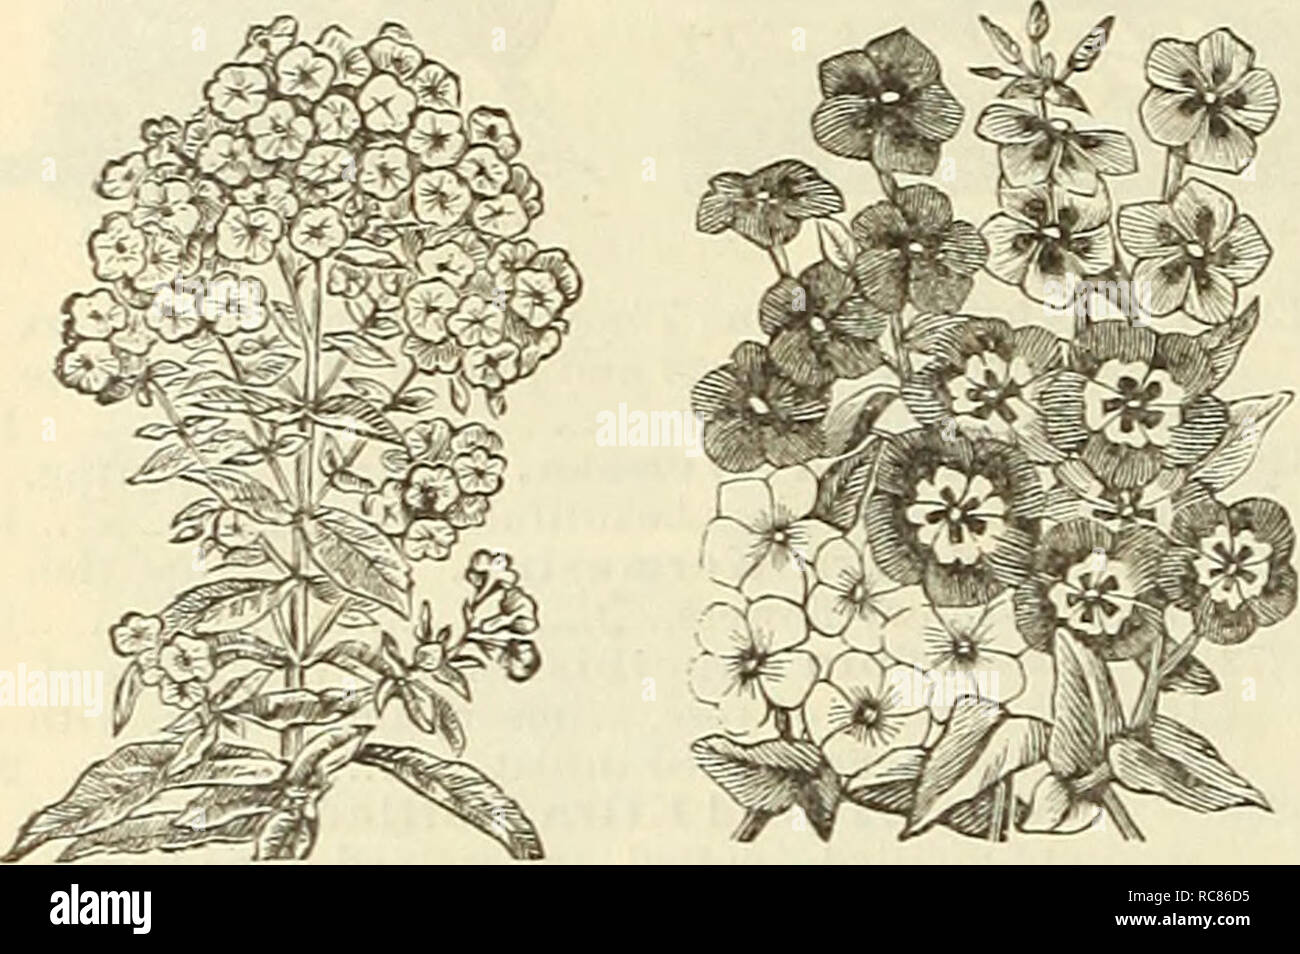 . Dreer's garden calendar for 1887. Seeds Catalogs; Nursery stock Catalogs; Gardening Catalogs; Flowers Seeds Catalogs. 60 DEEEE'S RELIABLE SEEDS PER PKT. PH LO X—Continued, 6328 P. Peach Blossom. Large flowers of a delicate salmon tint 10 6326— Radowitzi. Rose, striped white 10 6330— Mixed. All colors. Per oz., $1.00 5 PHLOX DRUMMOND! GRANDlFLORA. An improvement on the old varieties in stronger, more compact growth, and larger flowers, with white cen- tres, admirably relieved bv a dark violet eve; li feet. 6331 P. Alba'Pura. Pure white 10 6334— Carminea Alba Oculata. Rosy carmine, white eye 1 Stock Photo